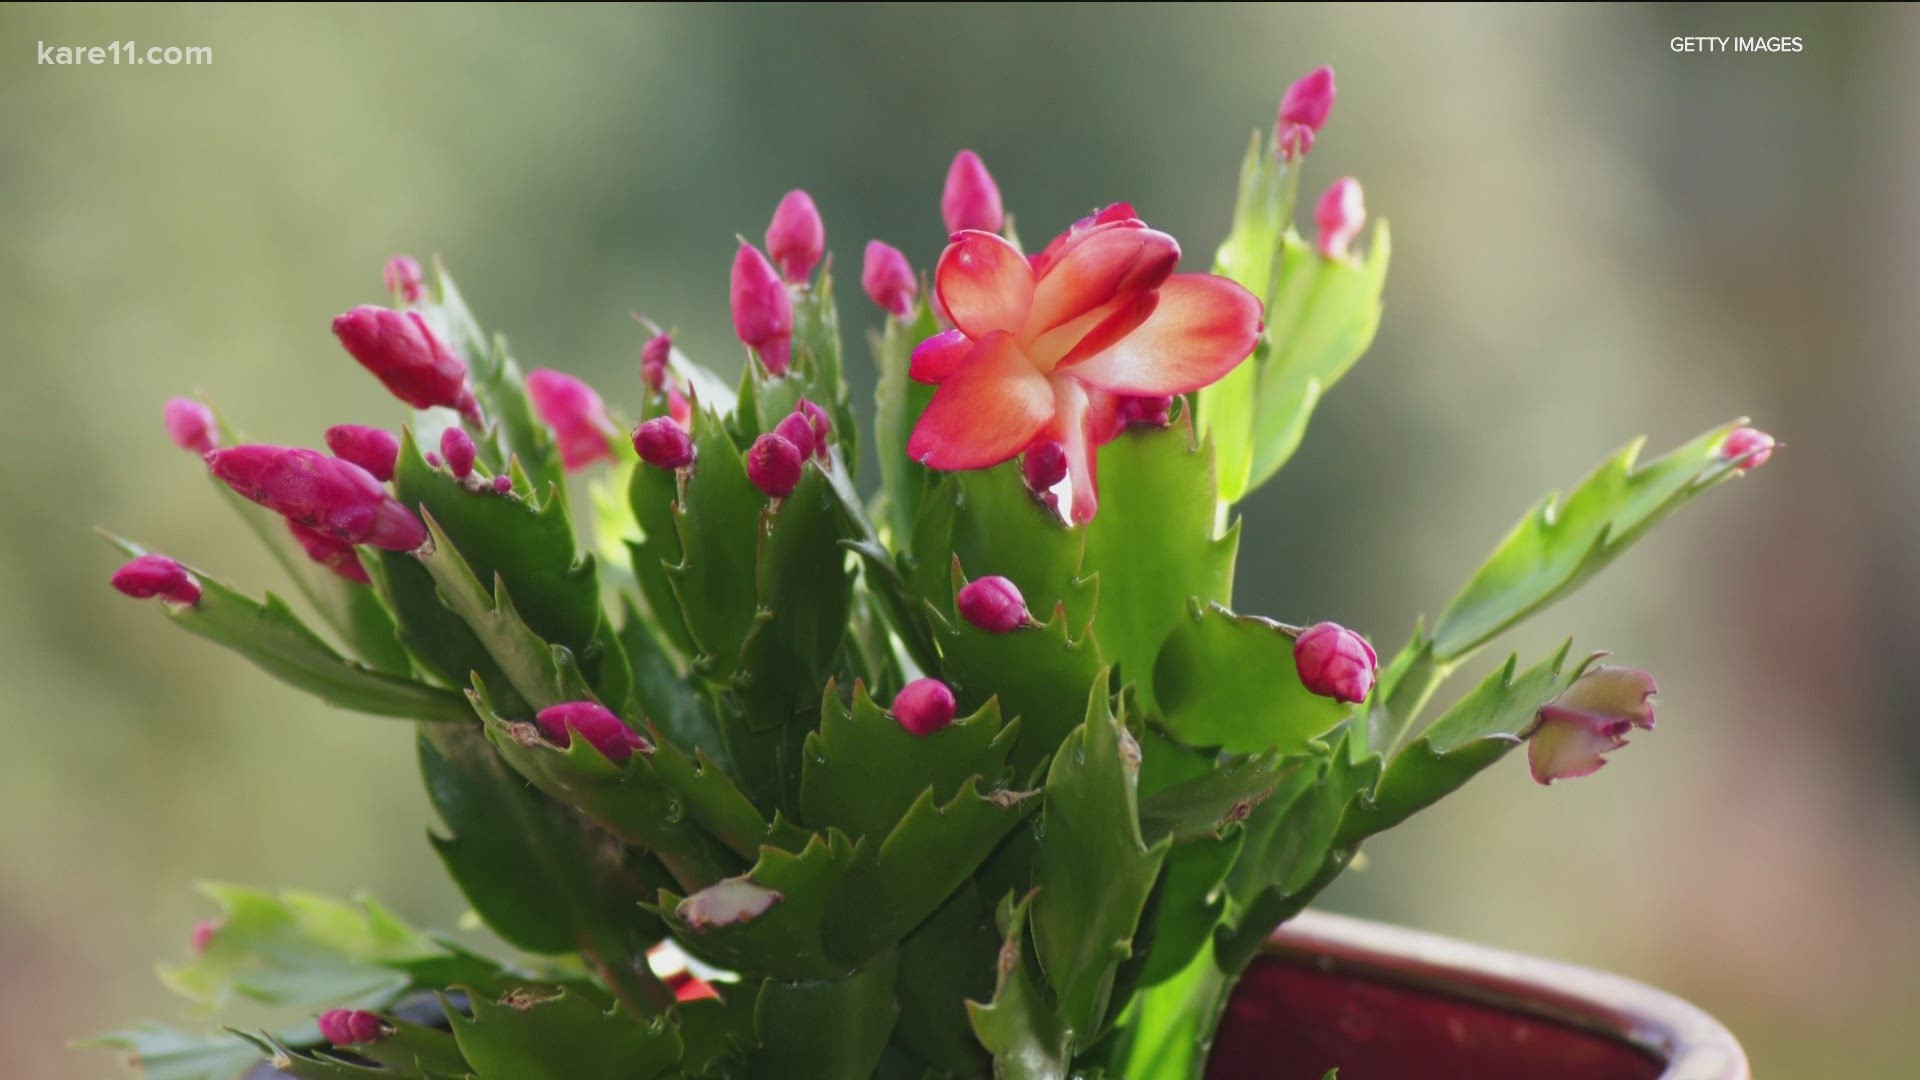 Bobby and Laura have tips on how to grow and care for your holiday cactus, no matter if it's an Easter, Thanksgiving or Christmas cactus.